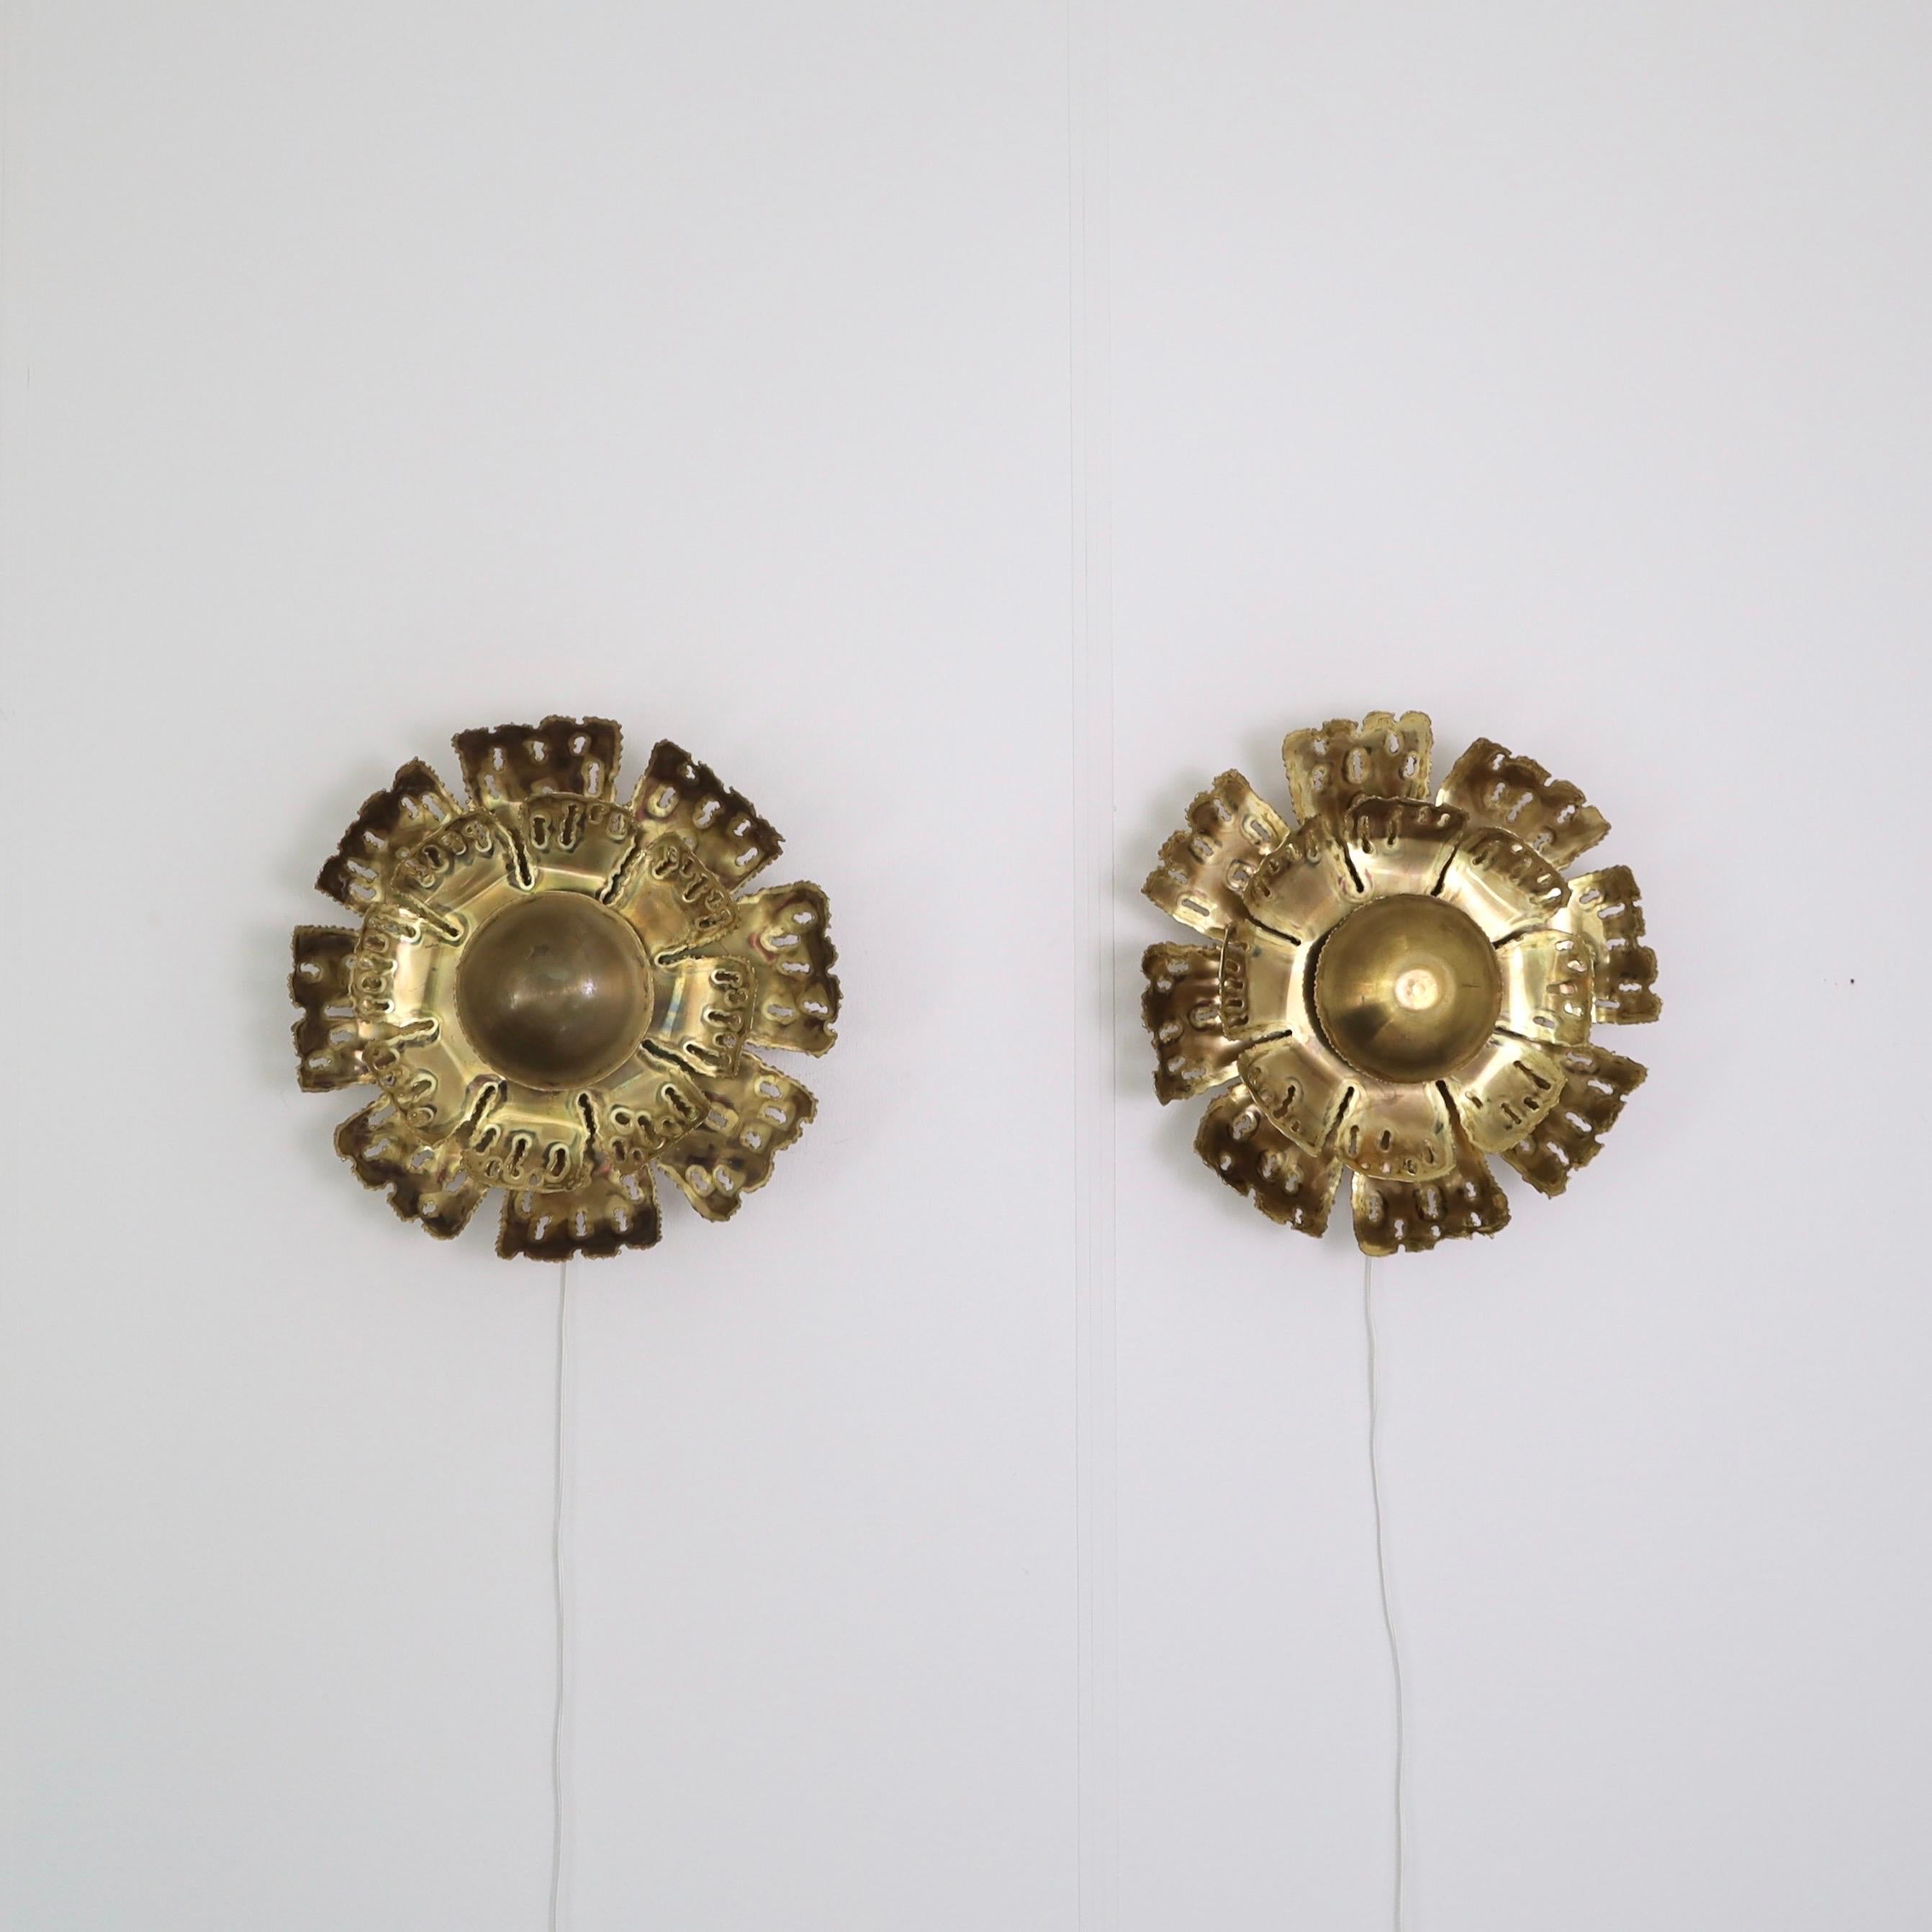 Danish Set of Large Brass Wall Lamps by Svend Aage Holm Sorensen, 1960s, Denmark For Sale